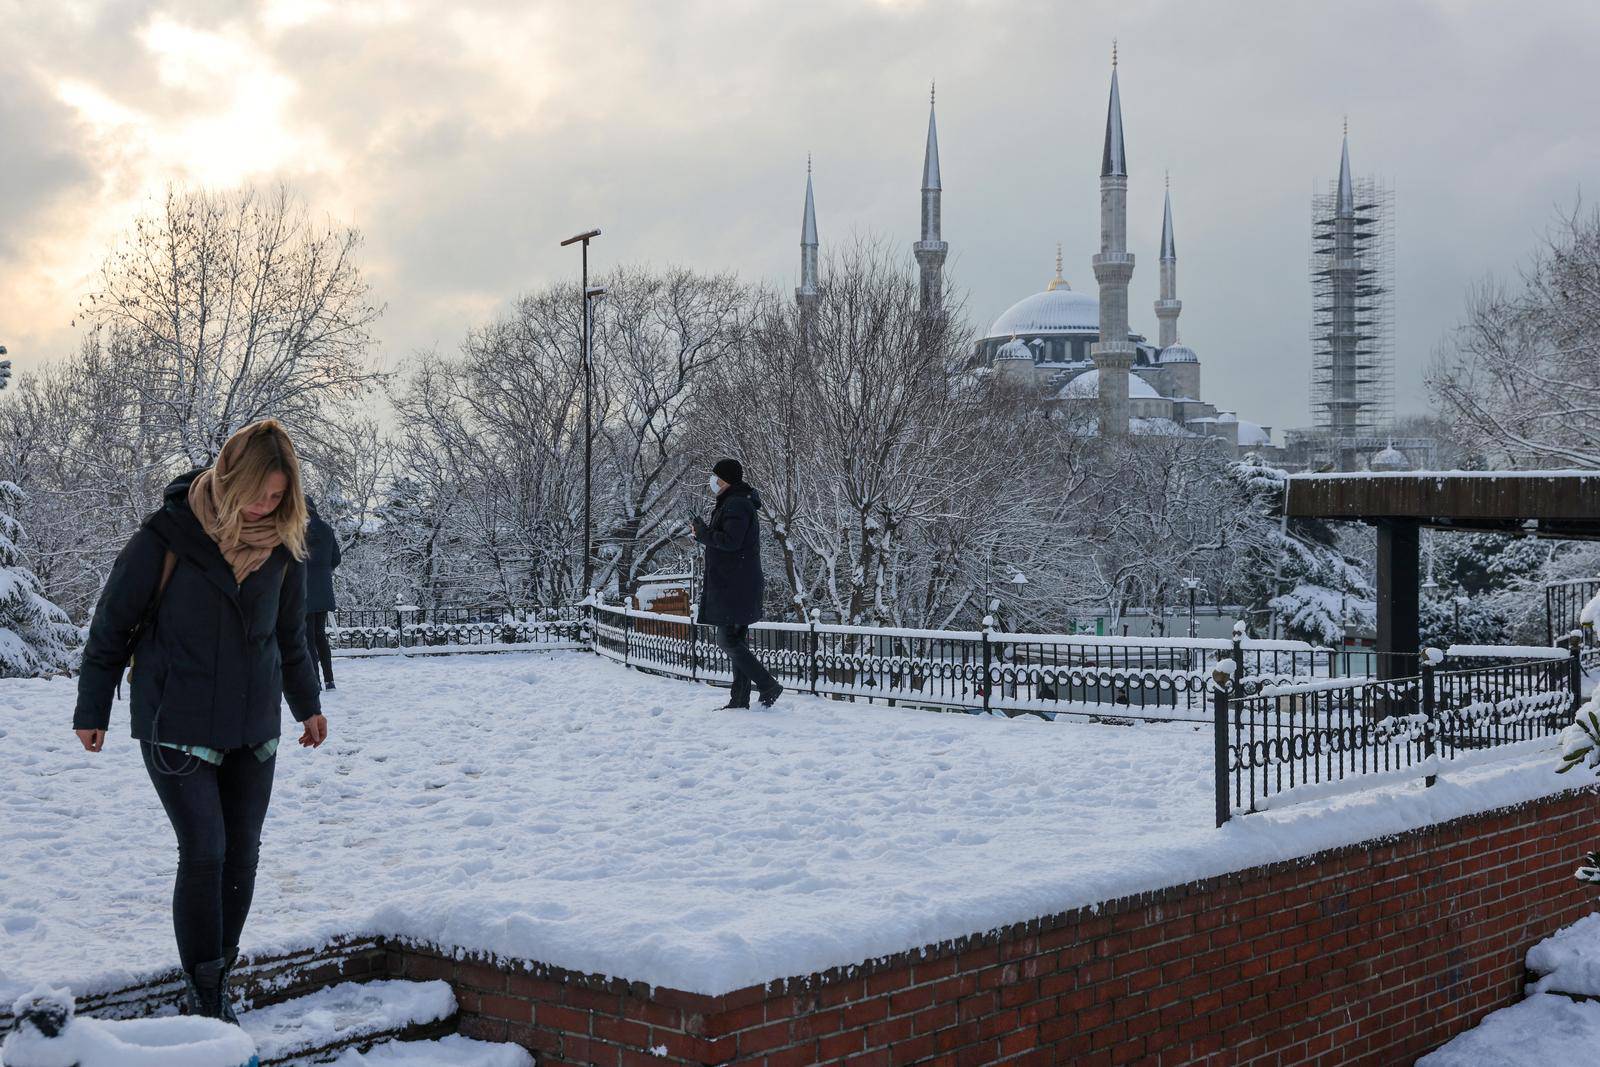 Tourists walk along Sultanahmet Square as Sultan Ahmet Mosque is seen in the background during a snowy day in Istanbul